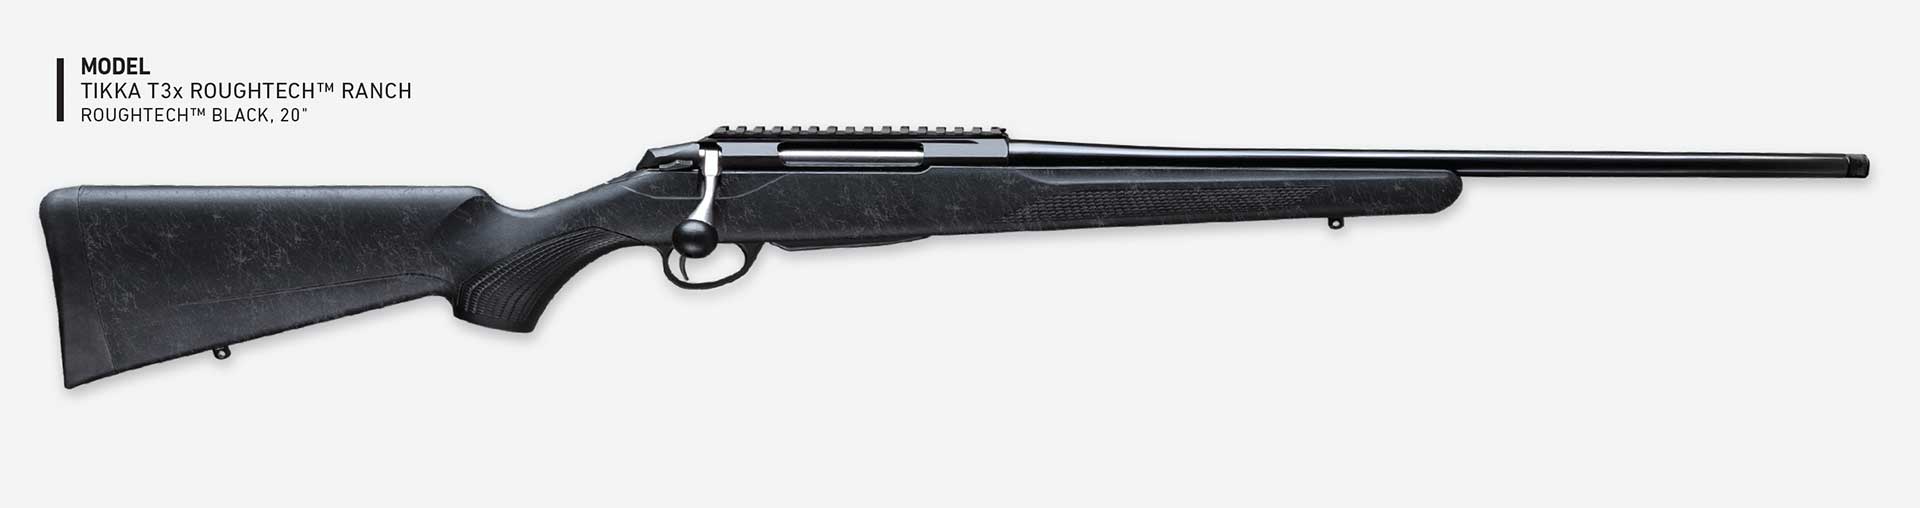 Right side of the all-black Tikka T3x Roughtech Ranch bolt-action rifle.